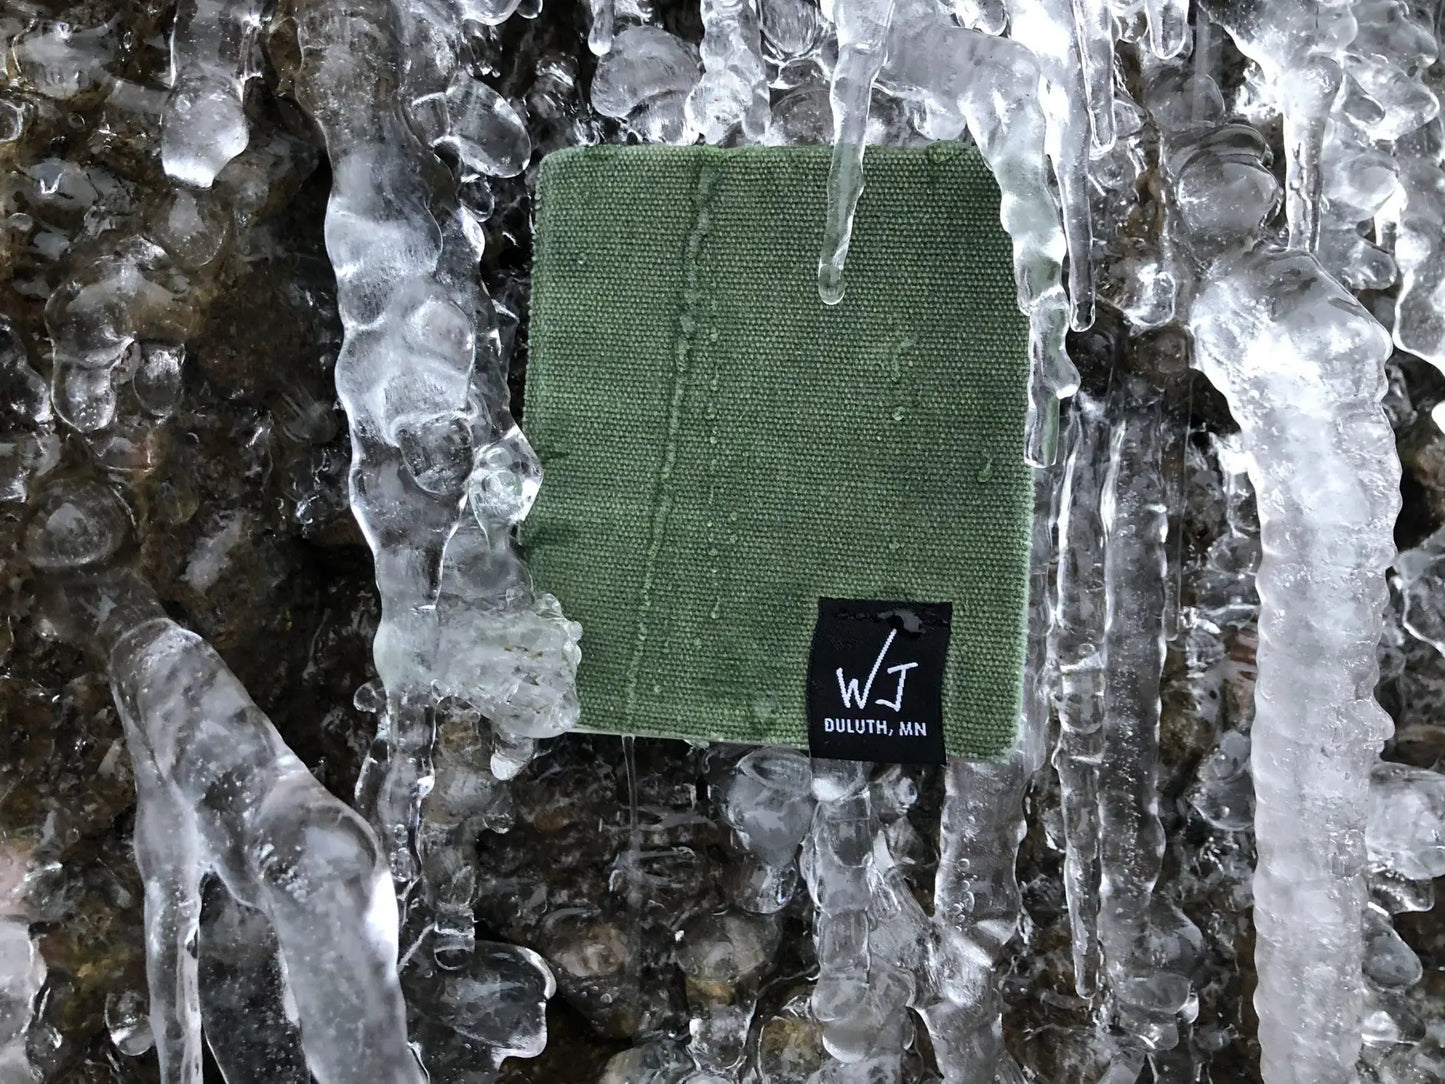 Green notepad in ice.